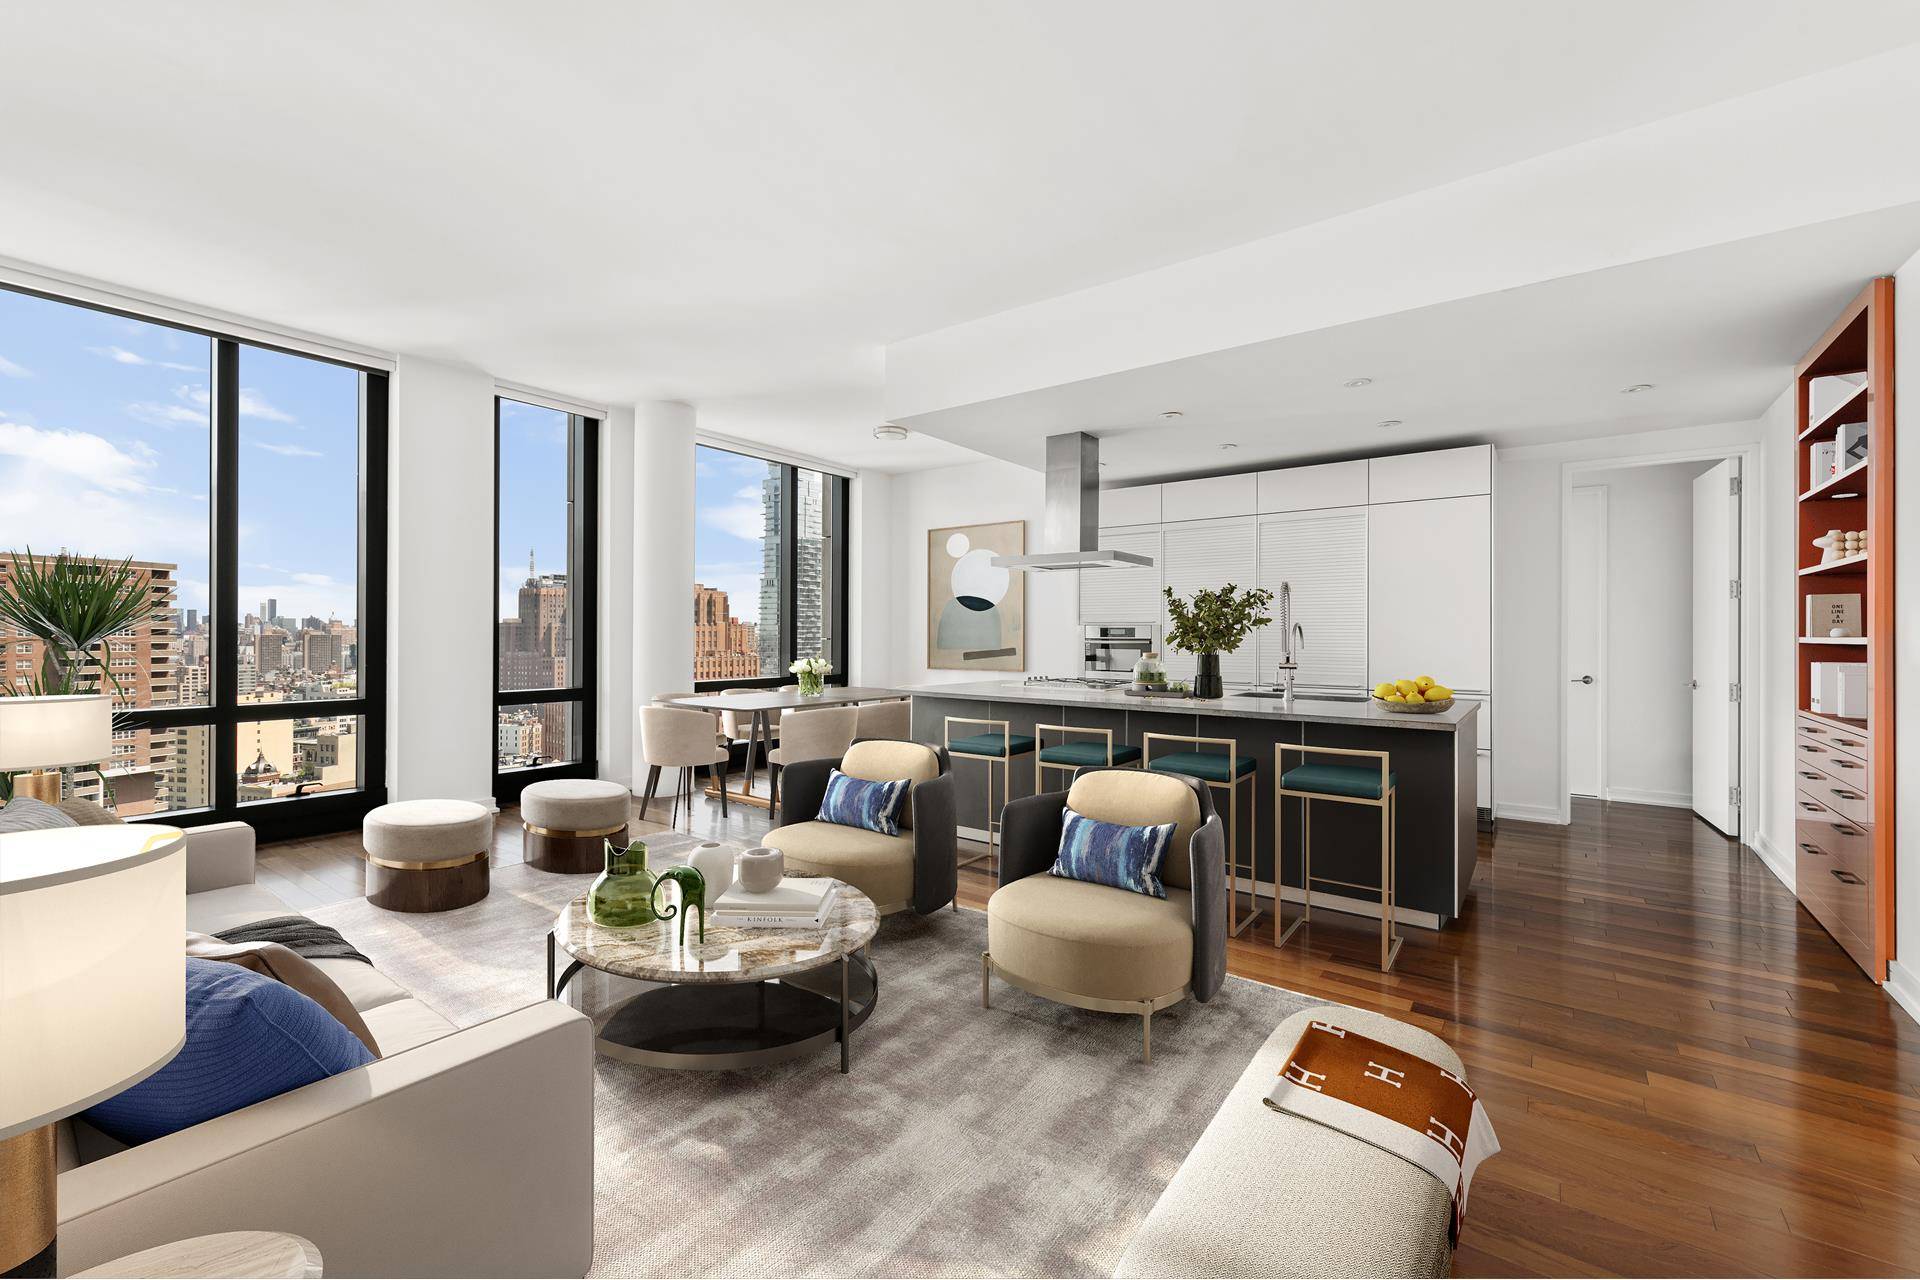 Perched on the 30th floor, this expansive 2 bedroom, 2 and a half bath residence at the esteemed 101 Warren Street Condominium boasts breathtaking vistas of the NYC skyline and ...